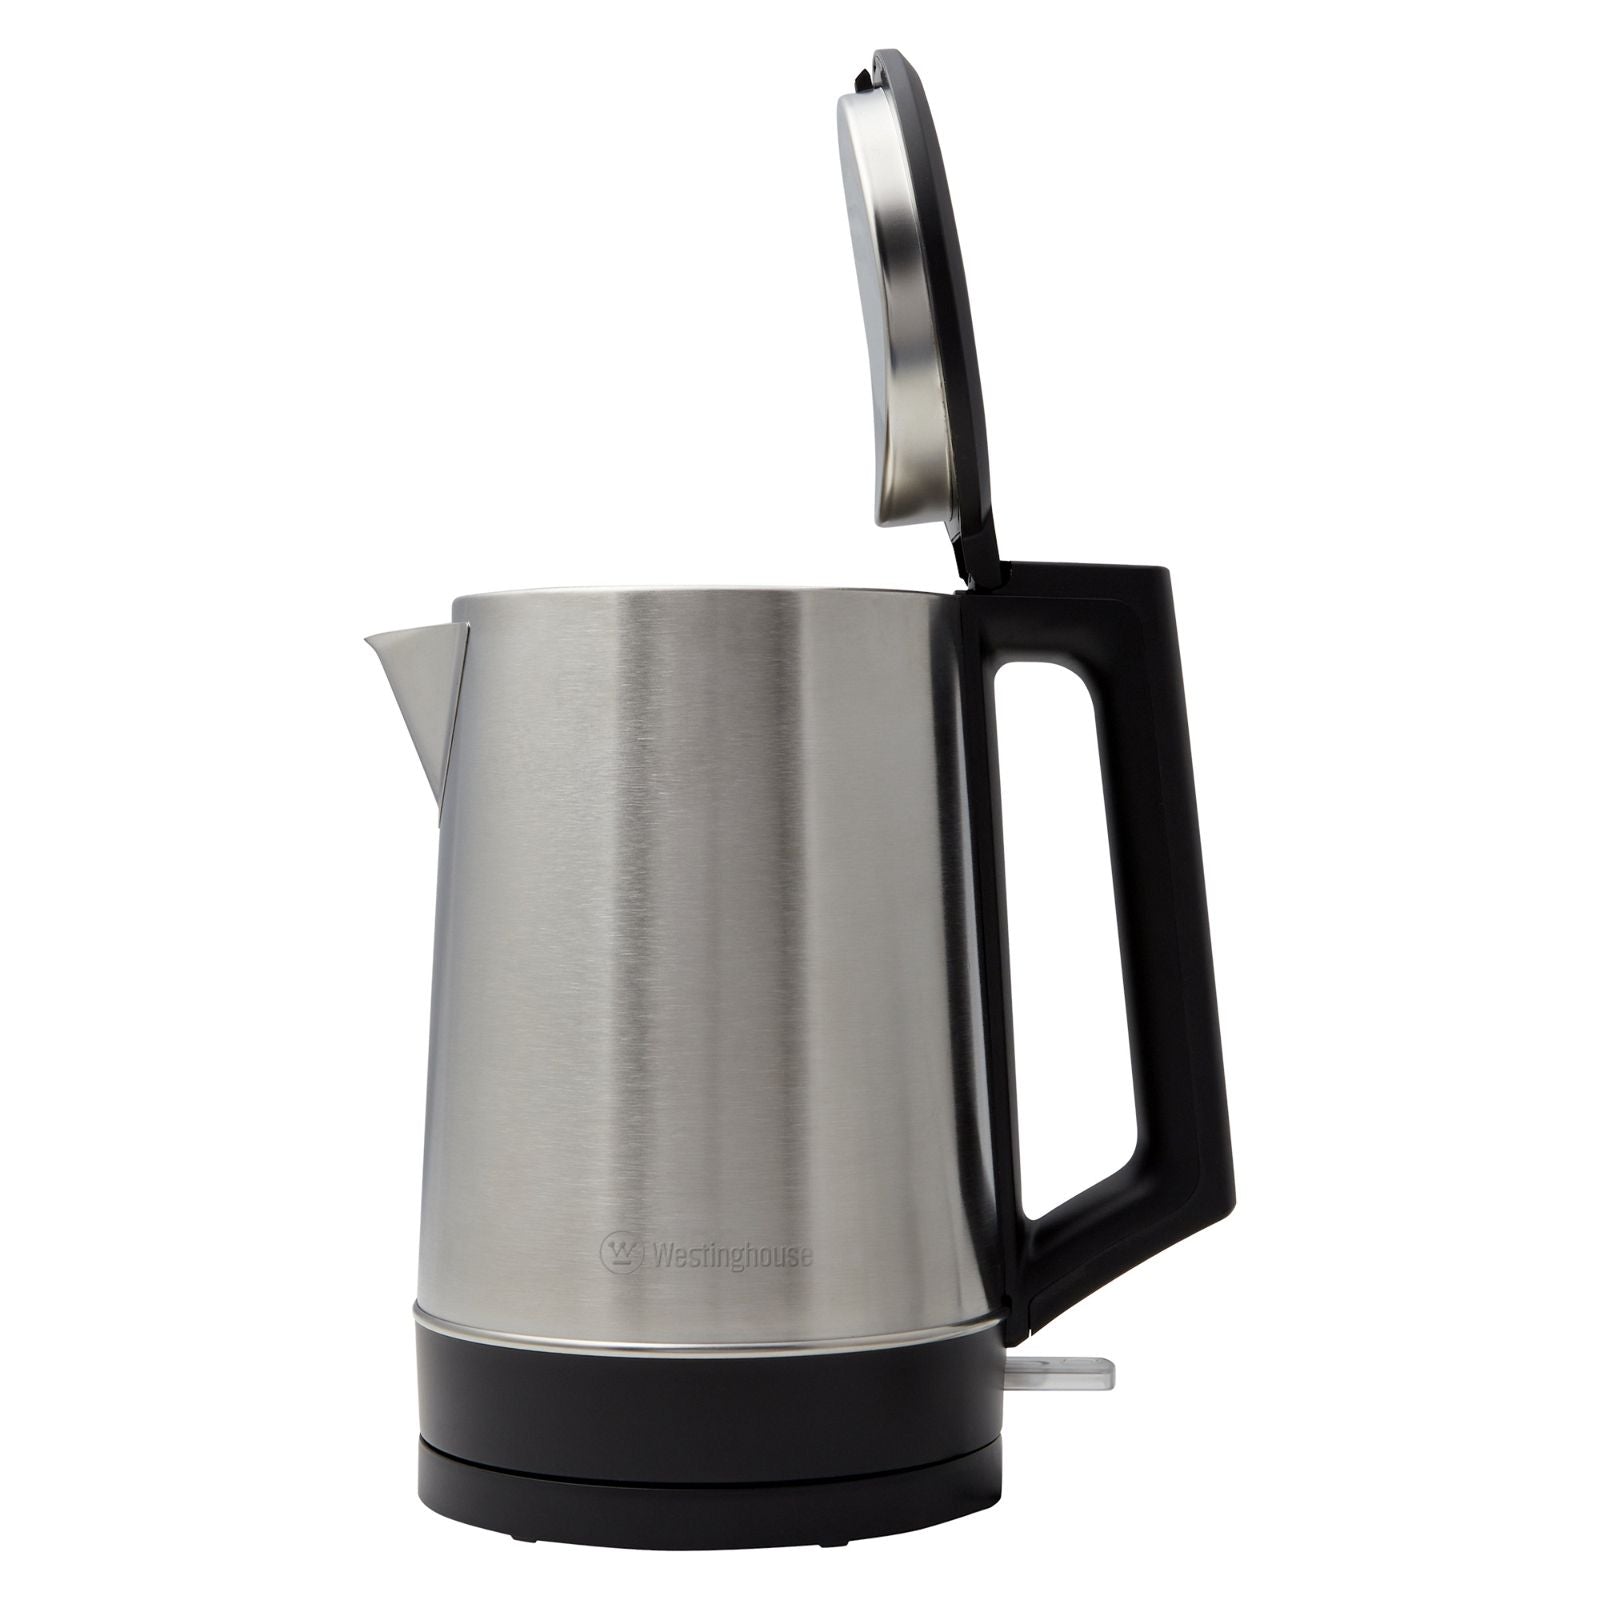 Westinghouse Kettle 1.7L 1800W Stainless Steel-#product_category#- Distributed by:  under license